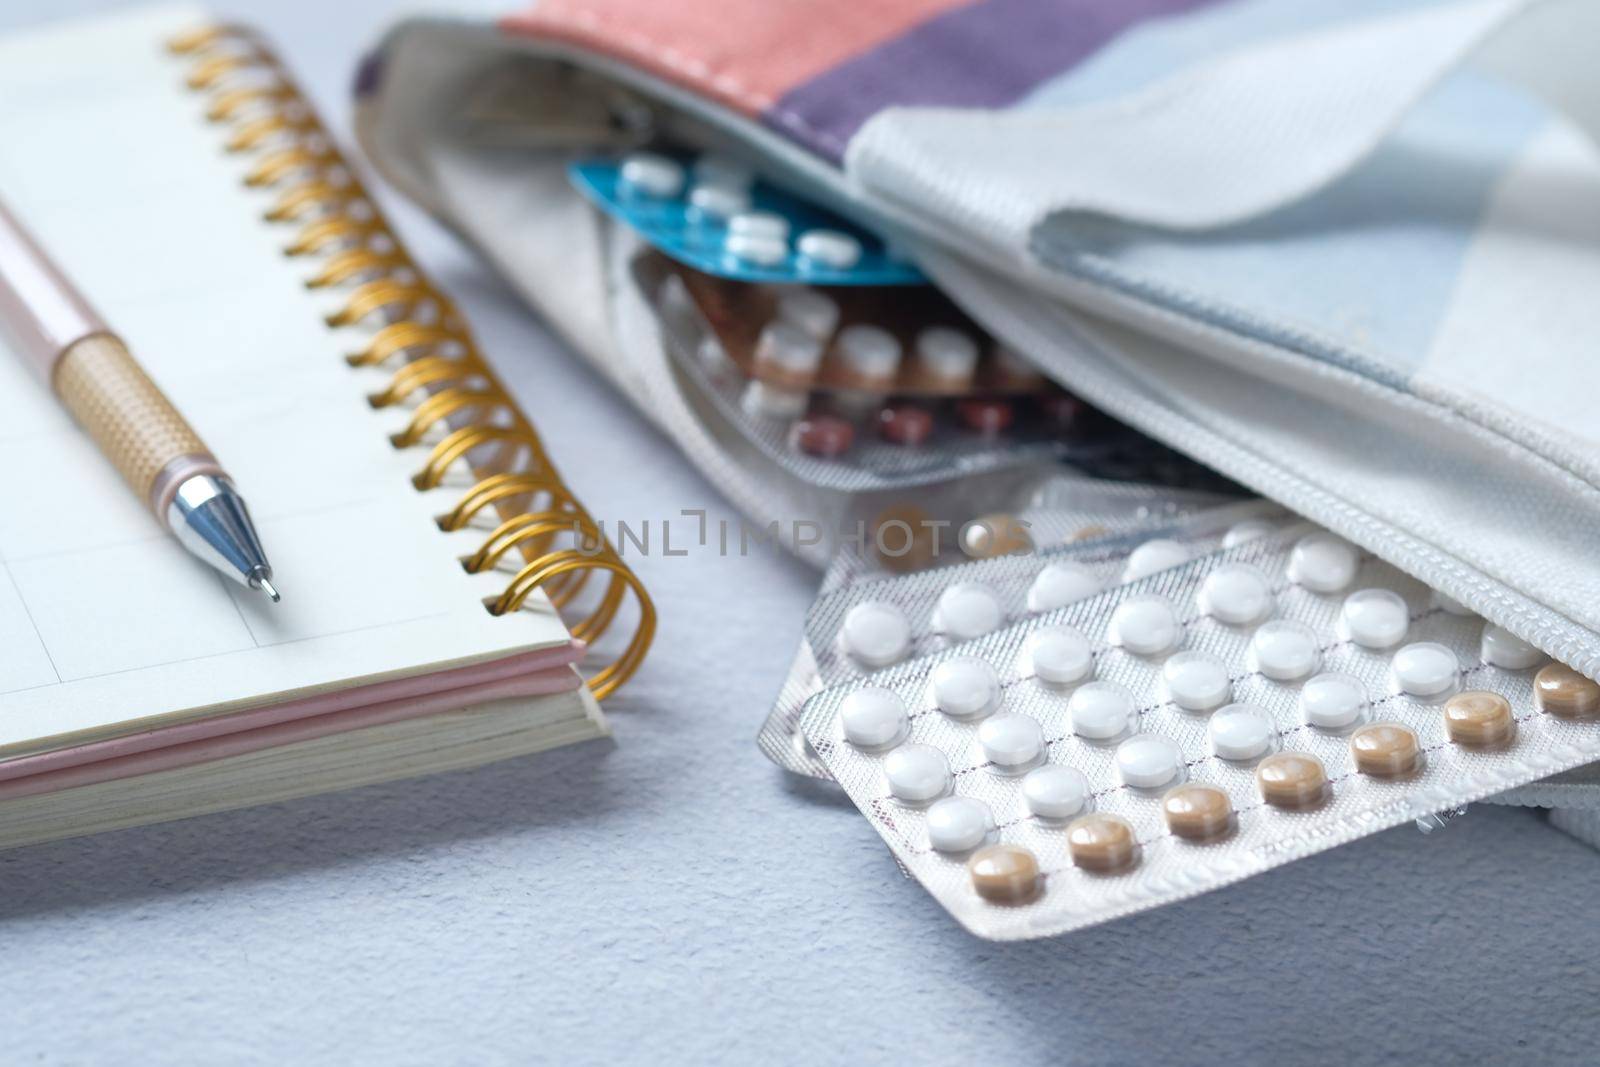 birth control pills in a bag with a planner on table by towfiq007